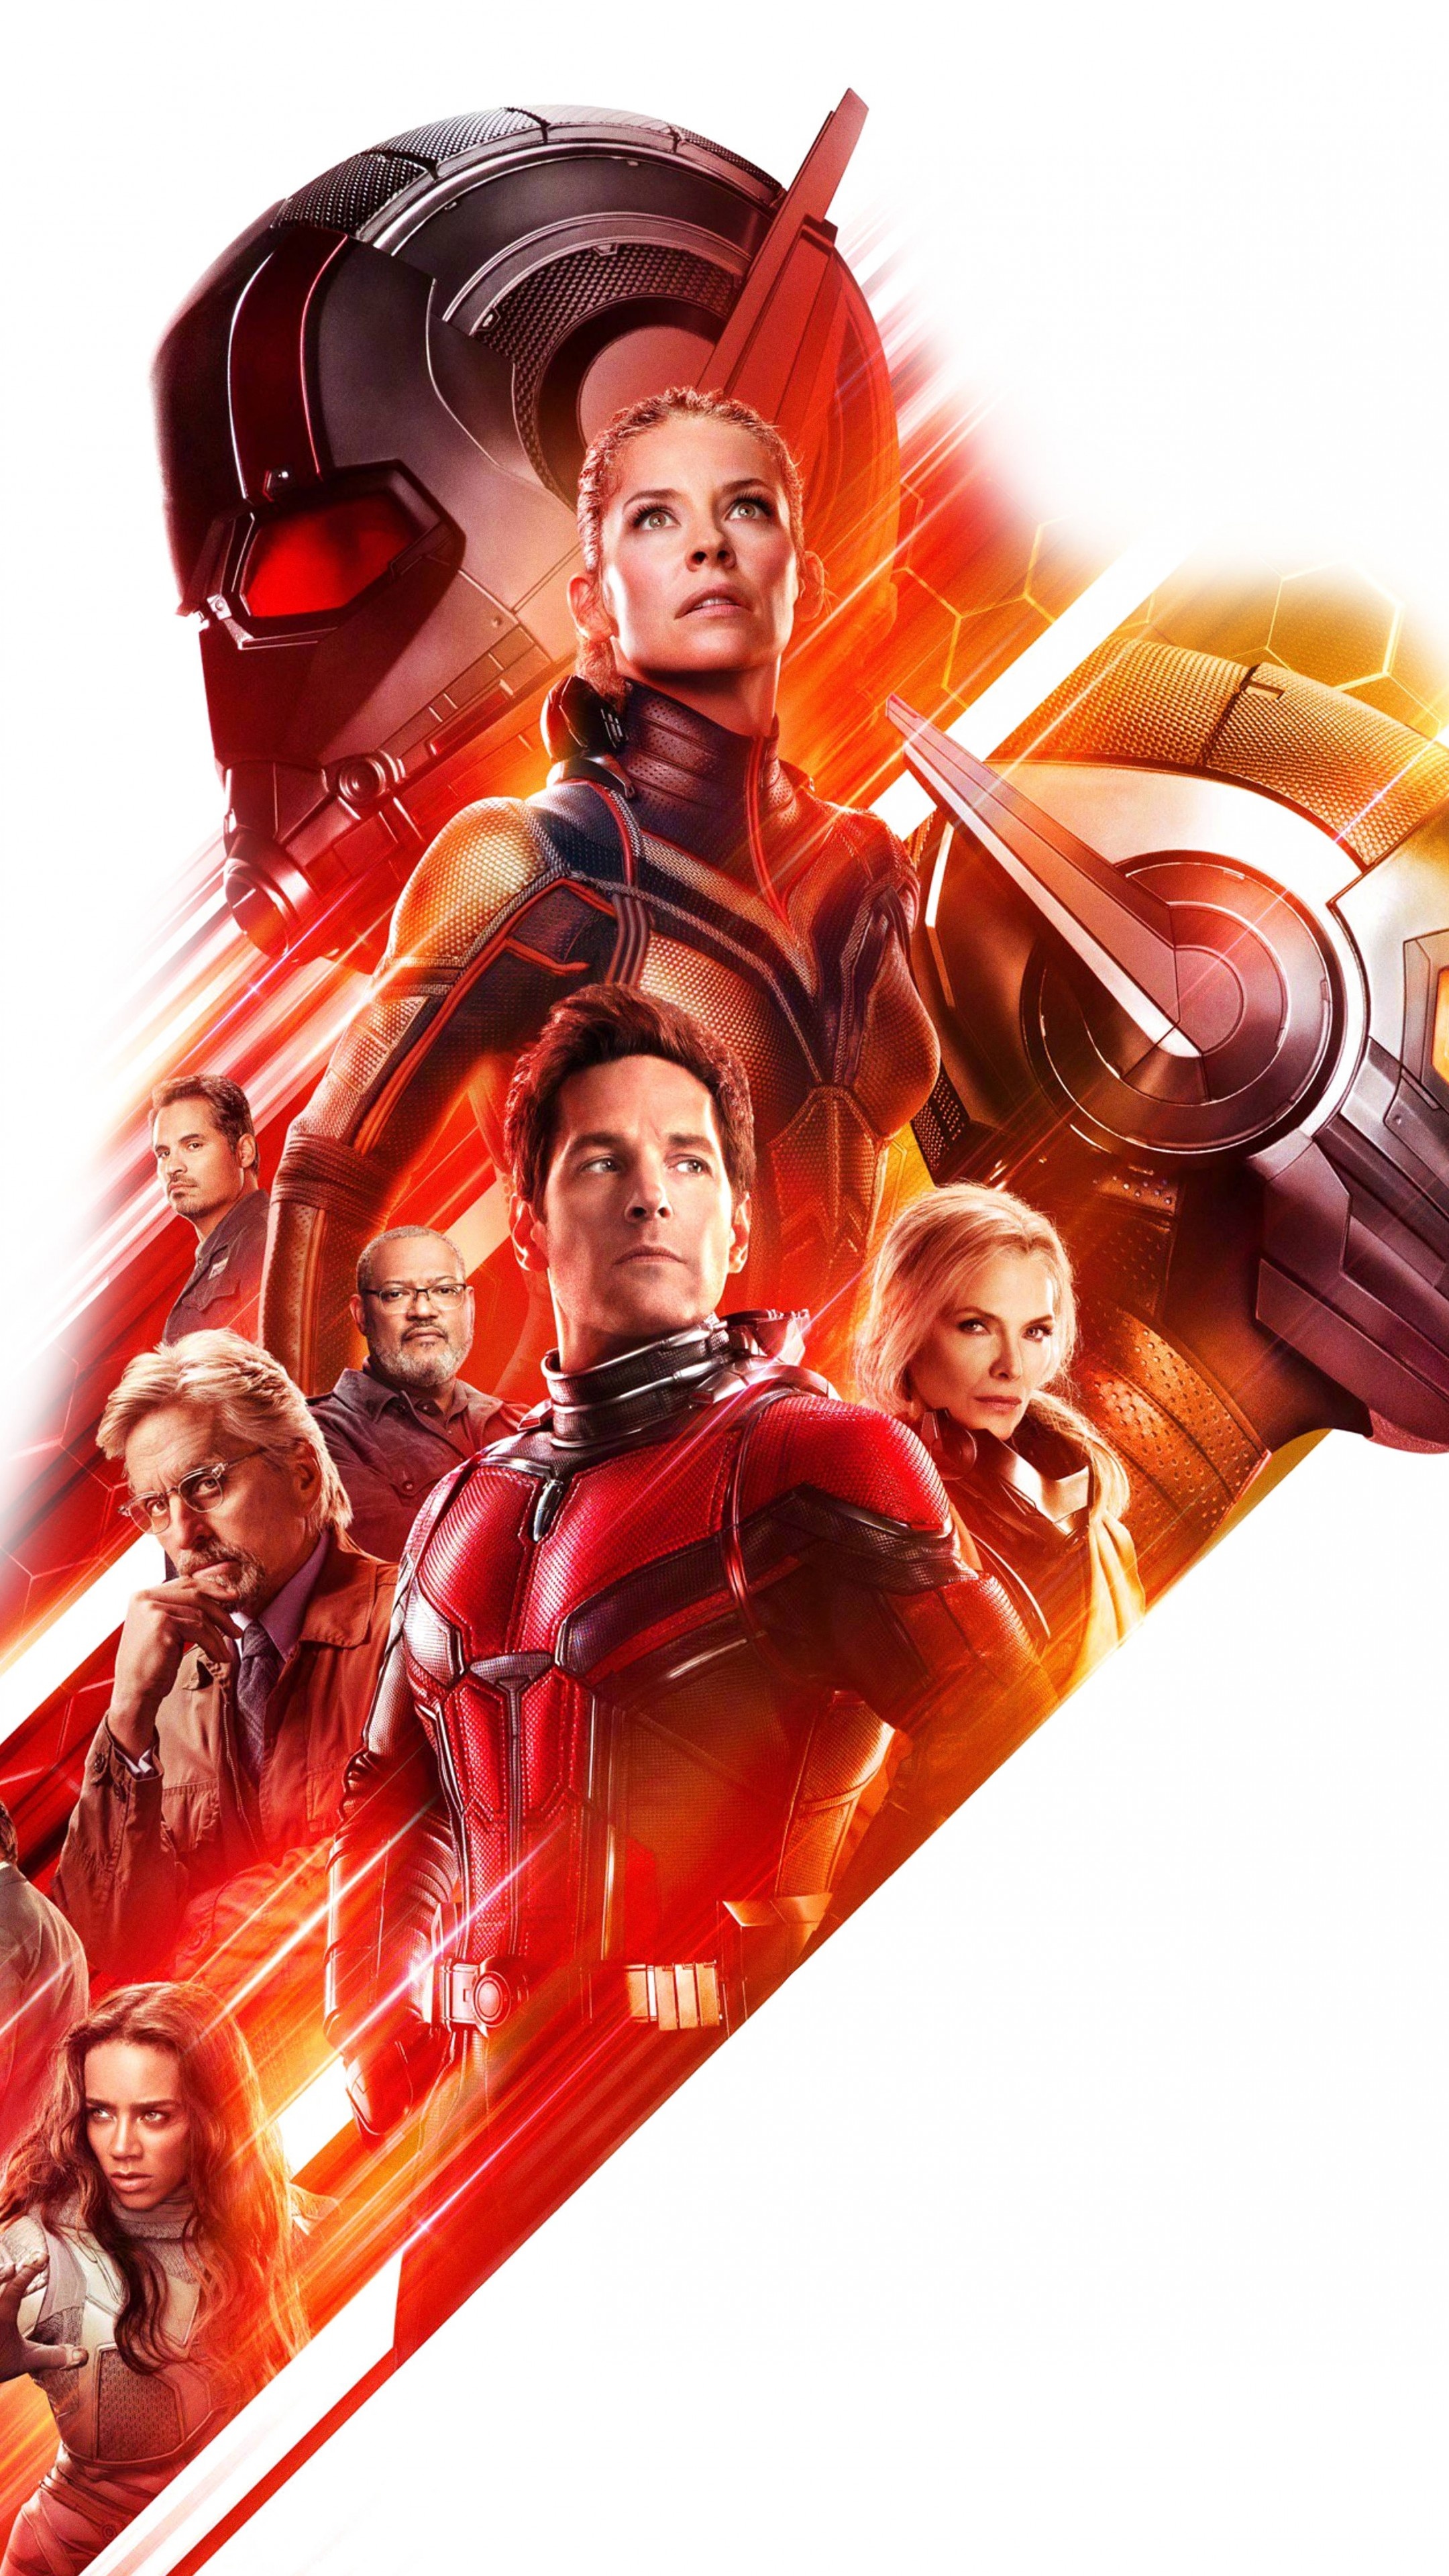 Paul Rudd: Ant-Man and the Wasp, Received a star on the Hollywood Walk of Fame in July 2015. 2160x3840 4K Background.